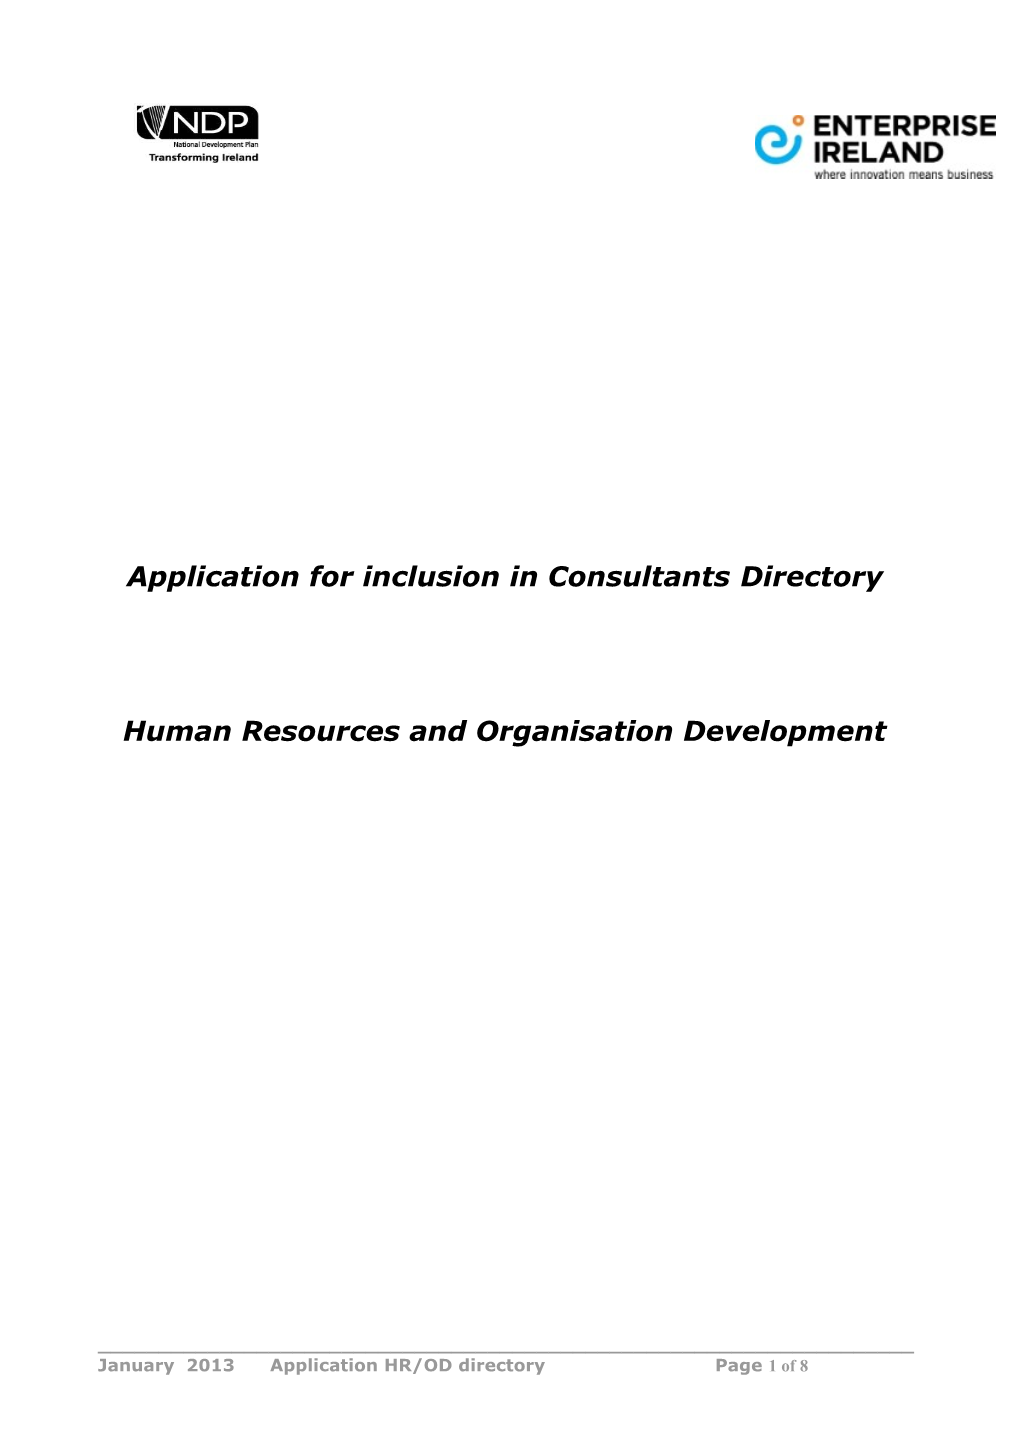 Application for Inclusion in Consultants Directory